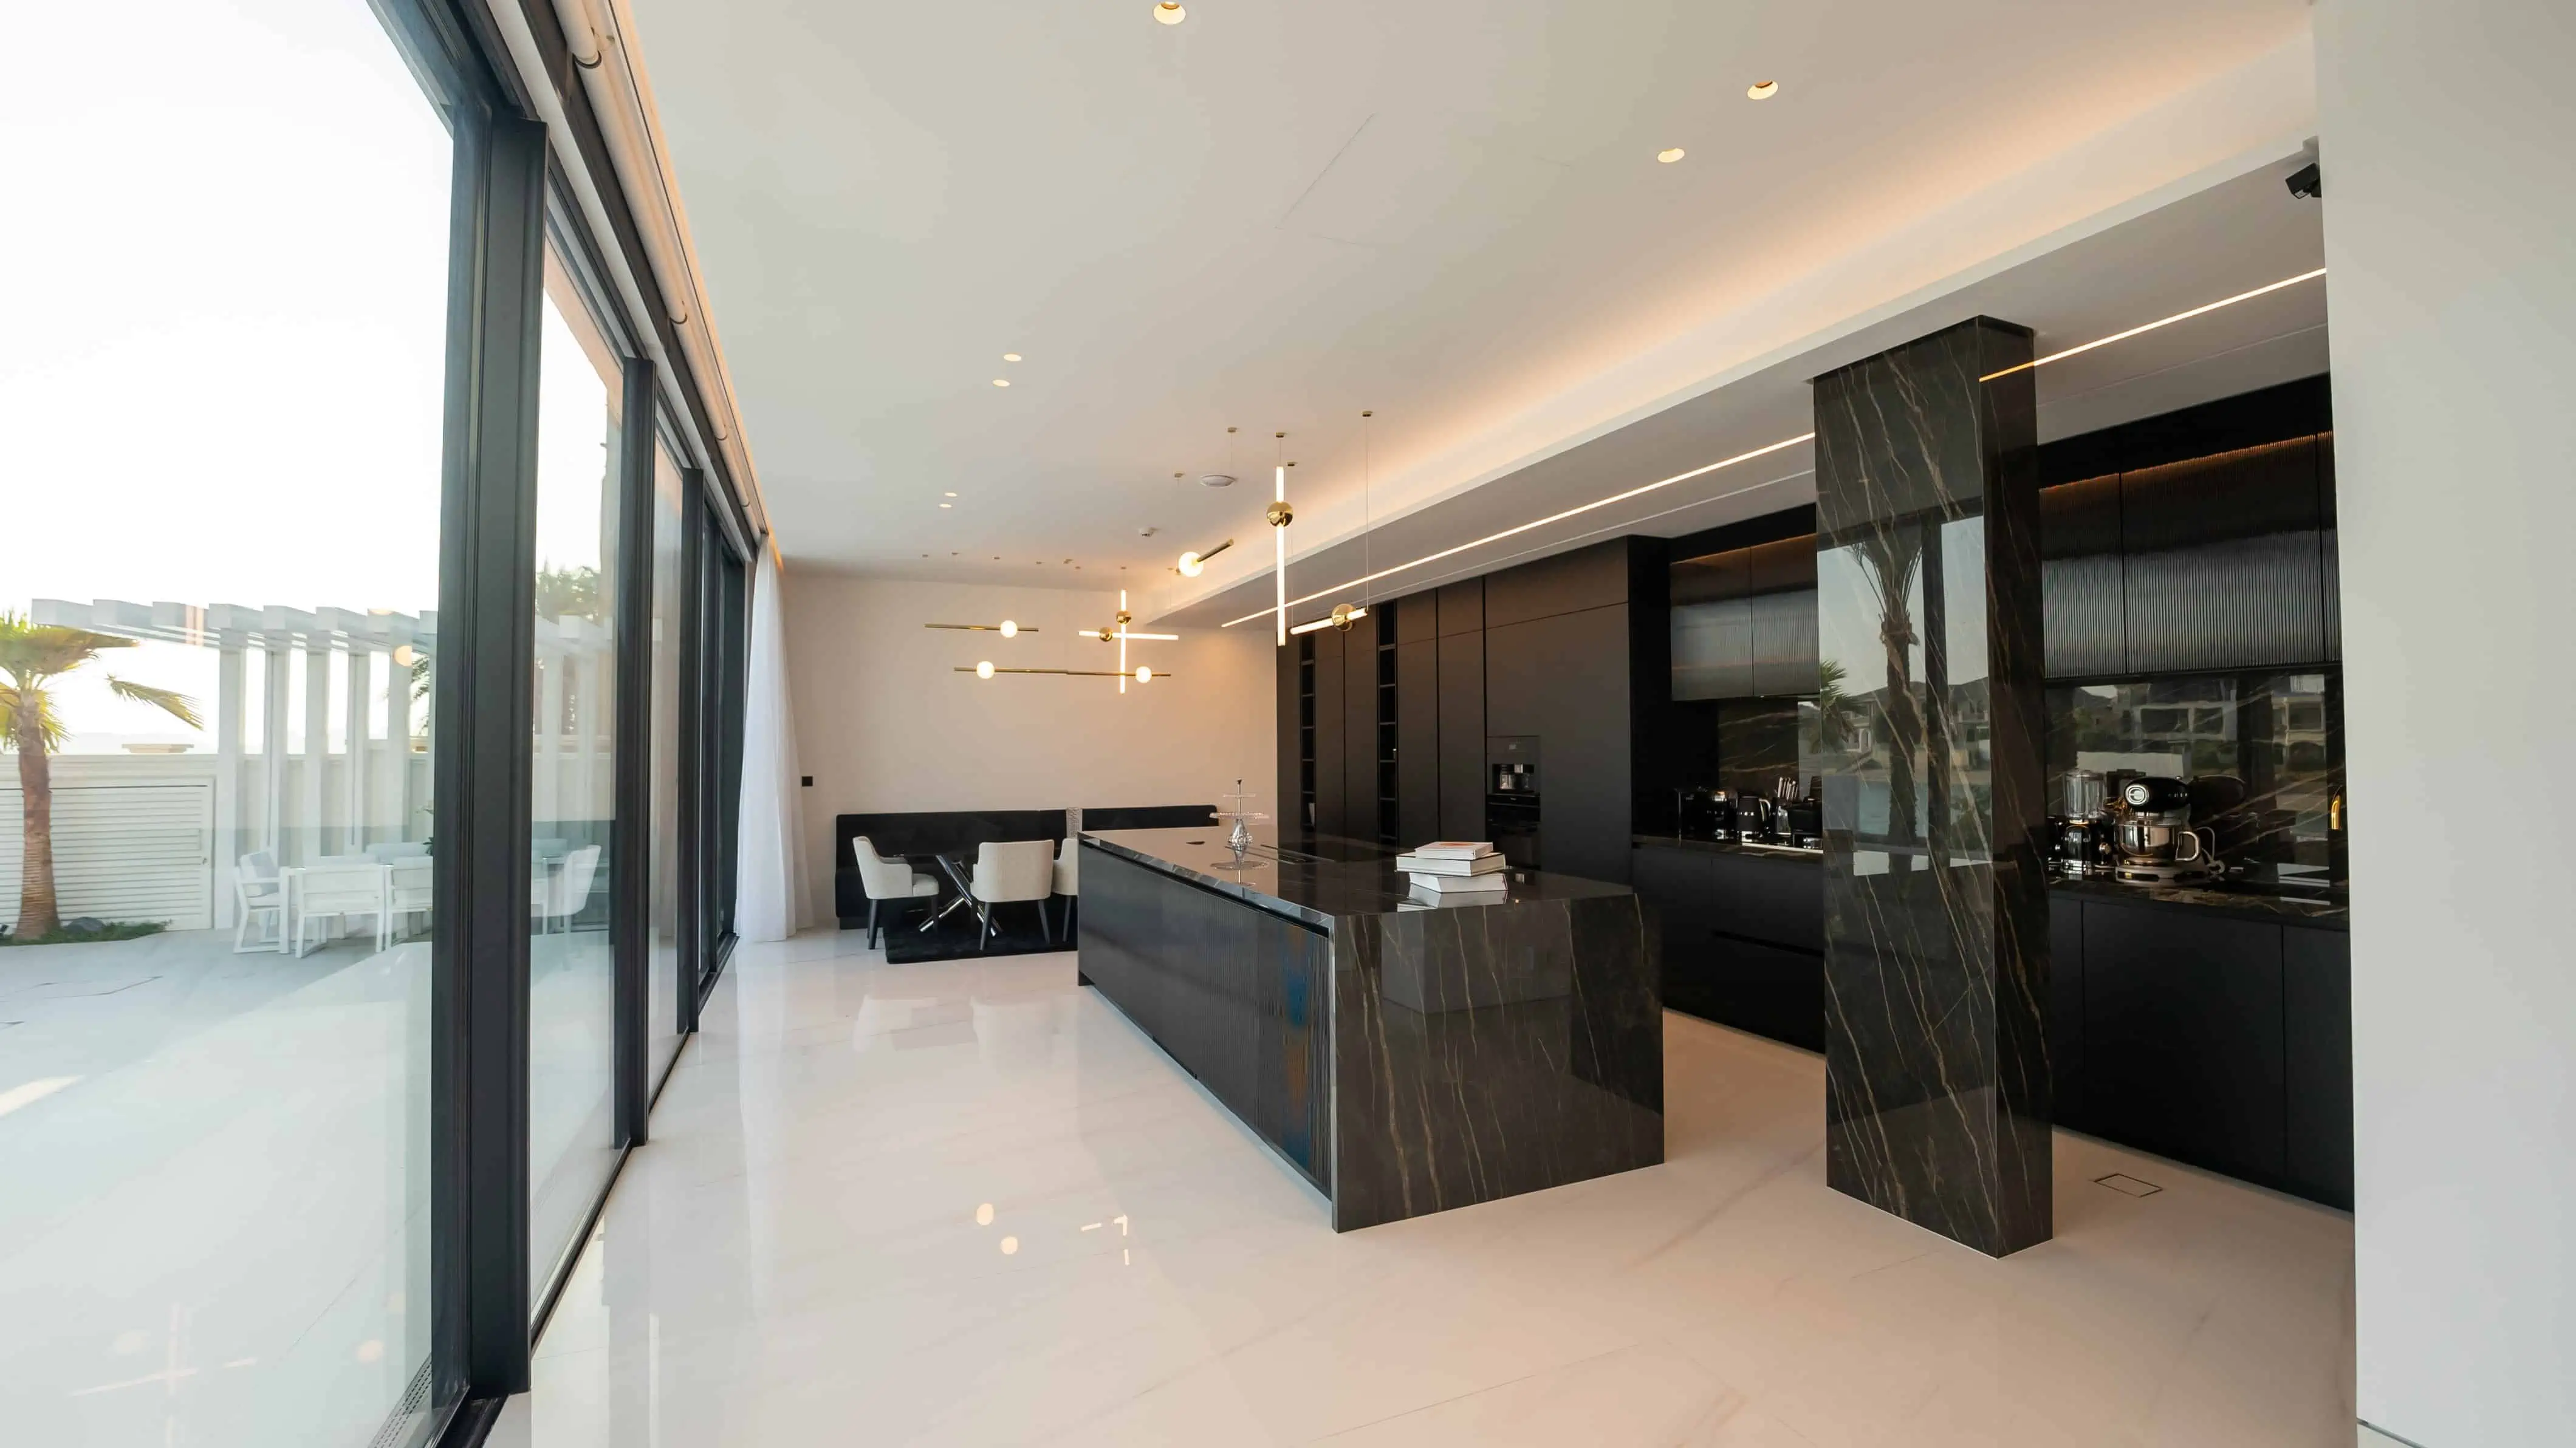 A sleek kitchen with black cabinets and glass doors, perfect for a contemporary home.